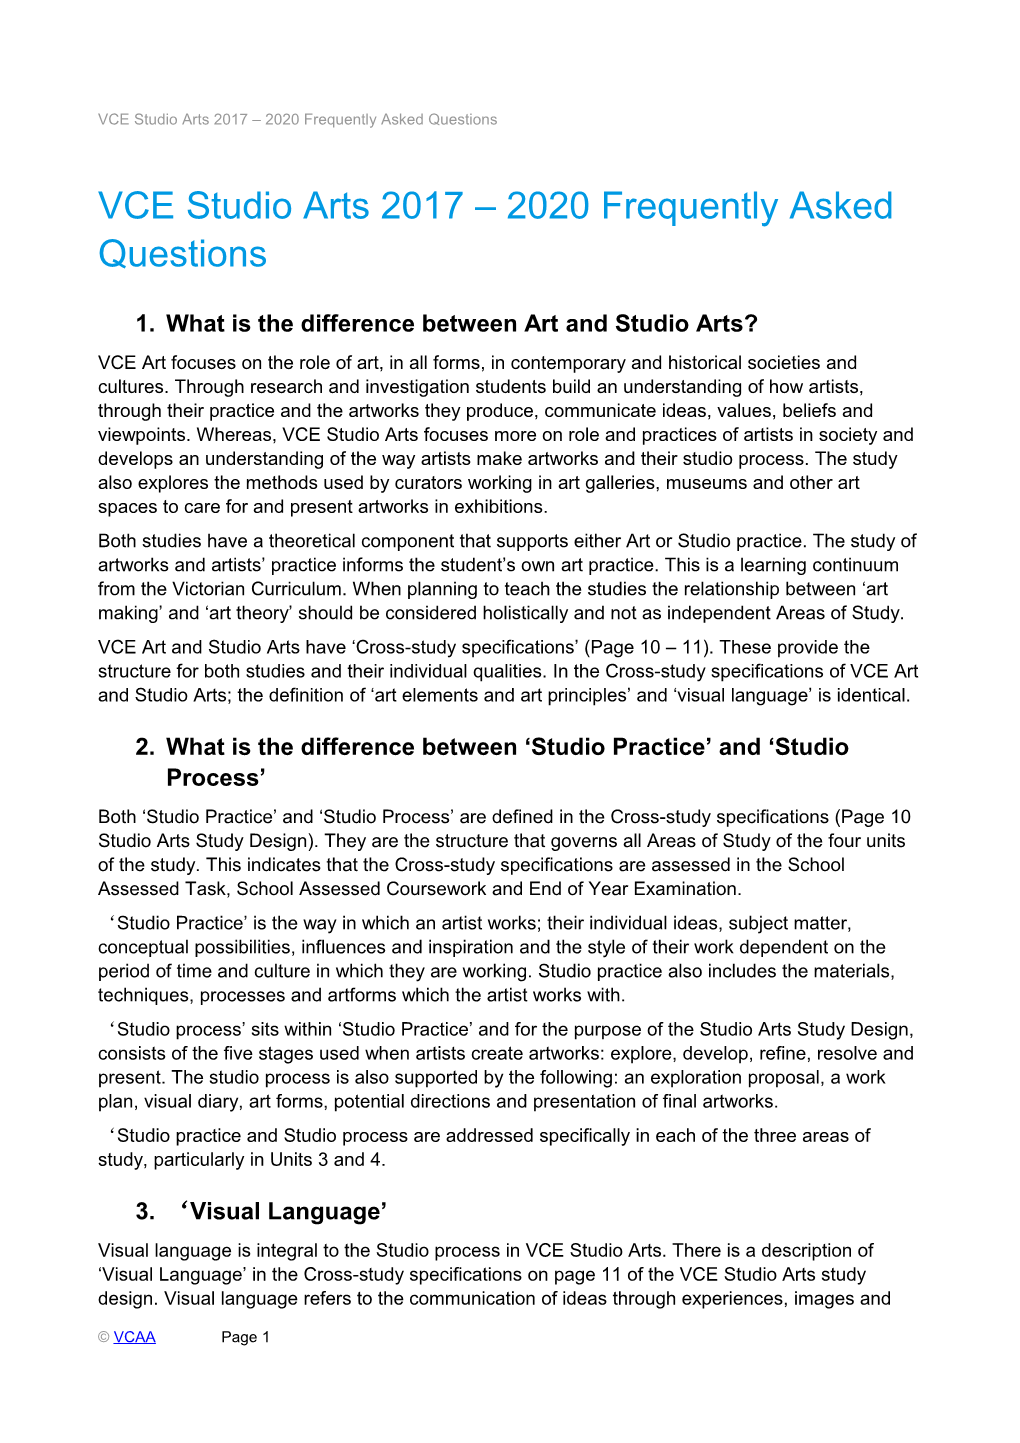 VCE Studio Arts 2017 2020 Frequently Asked Questions